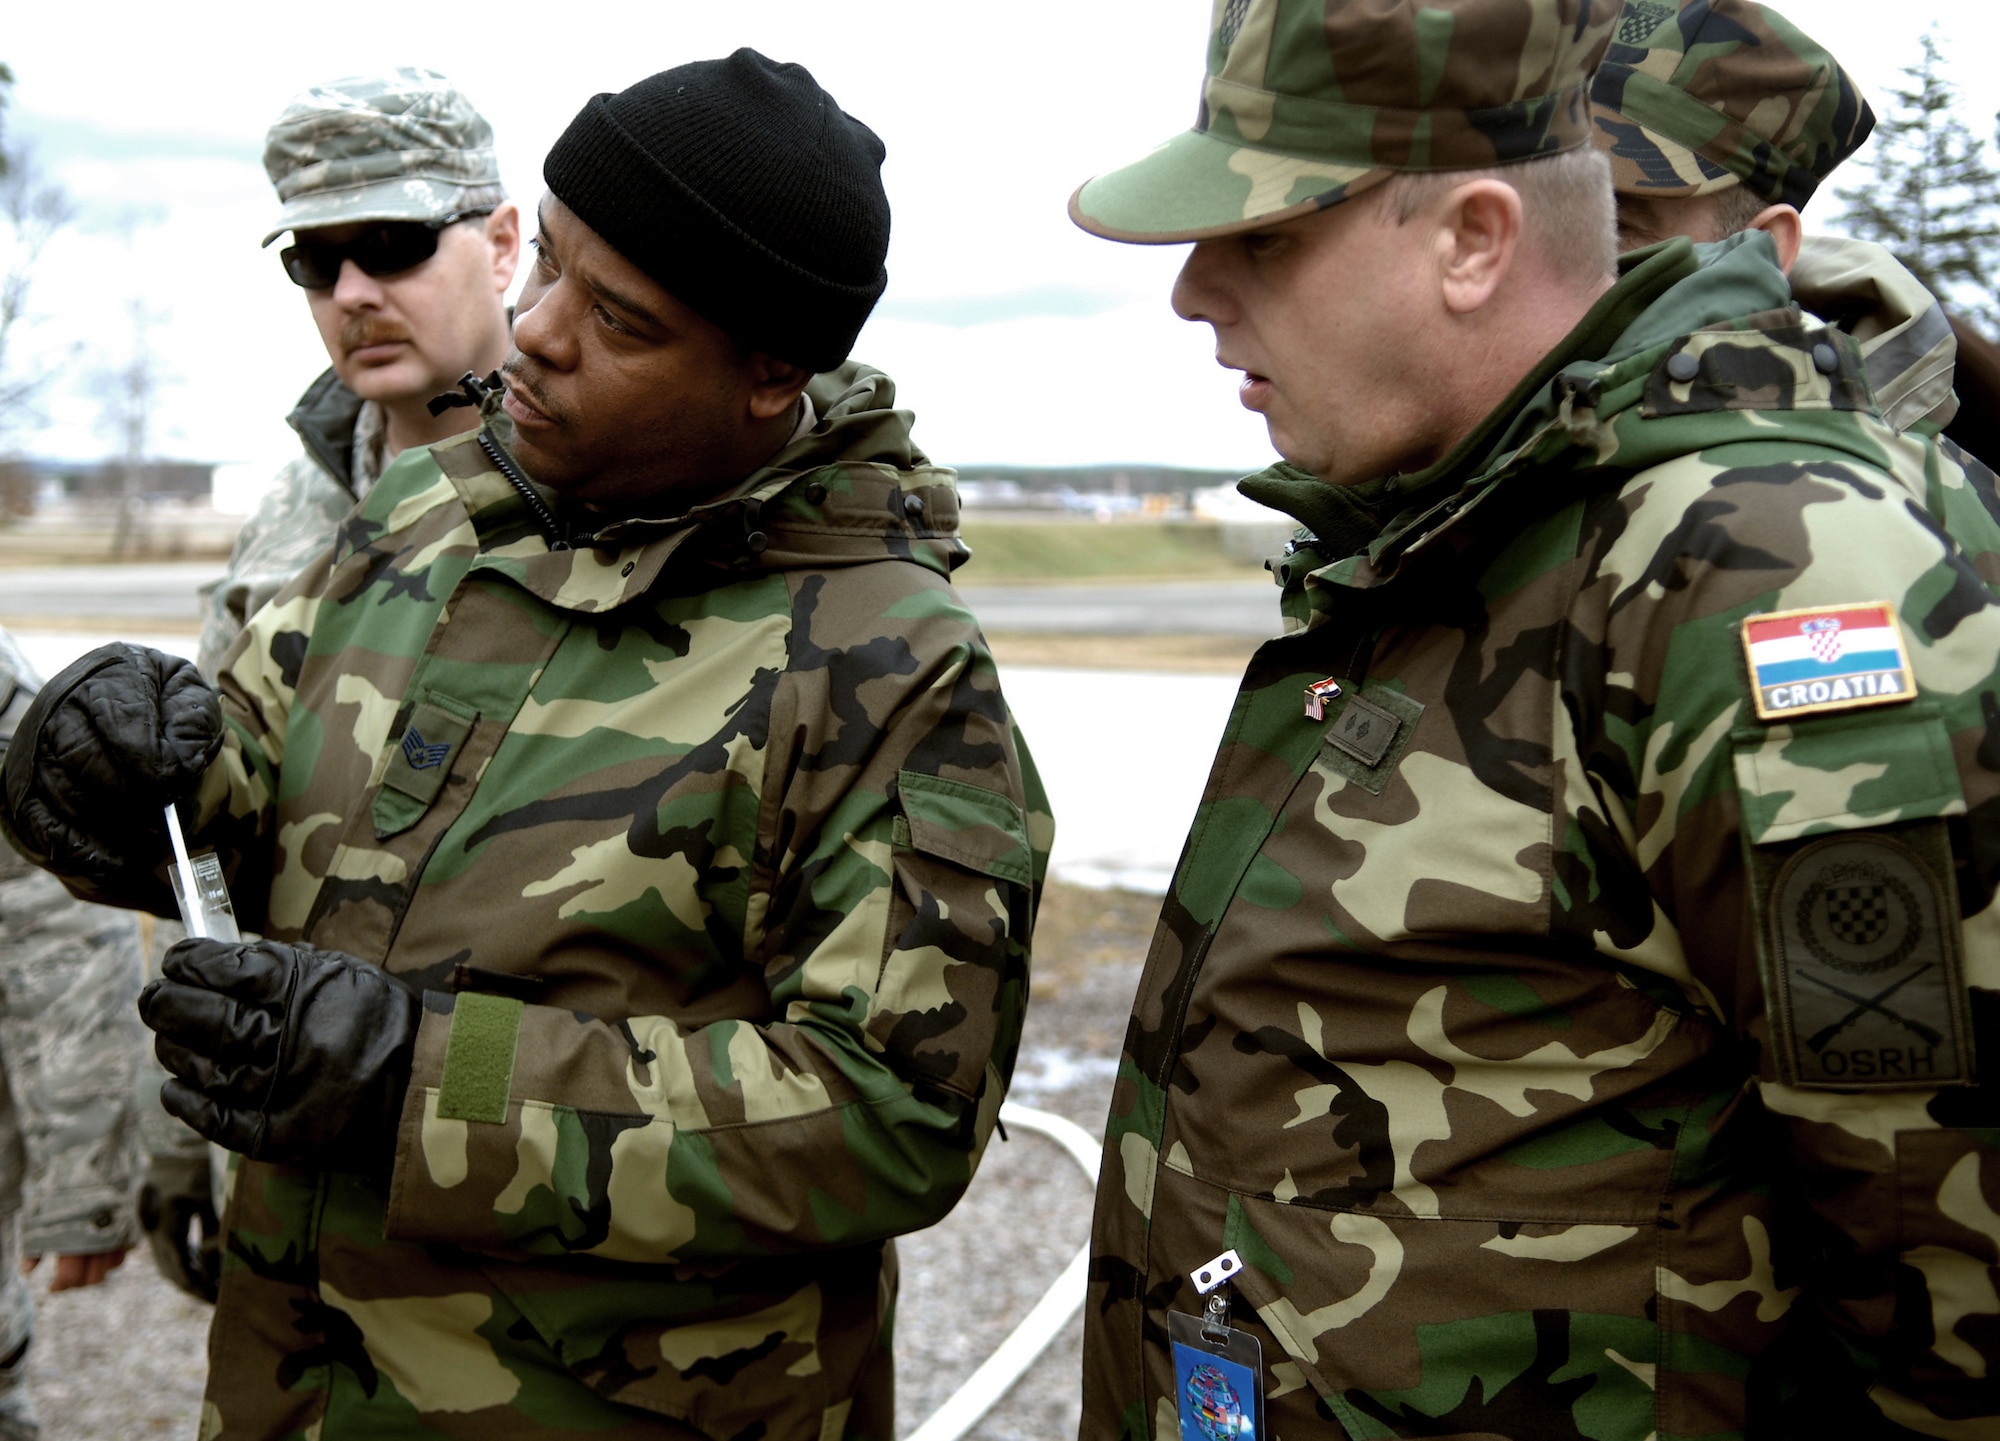 U.S. Air Force Reserve Staff Sgt. Maurice Wakins and Private 1st Class Stanko Bosnjak test water they have just purified using the H9518-1 reverse osmosis water purification unit. This year’s Silver Flag Exercise hosted here Feb. 21 - 28 allowed USAFE Airmen, Air Force Reserve and members of the Croatian Army for the first time to observe how Airmen prepare to deploy to austere locations. (U.S. Air Force photo by Tech. Sgt. Michael Voss)